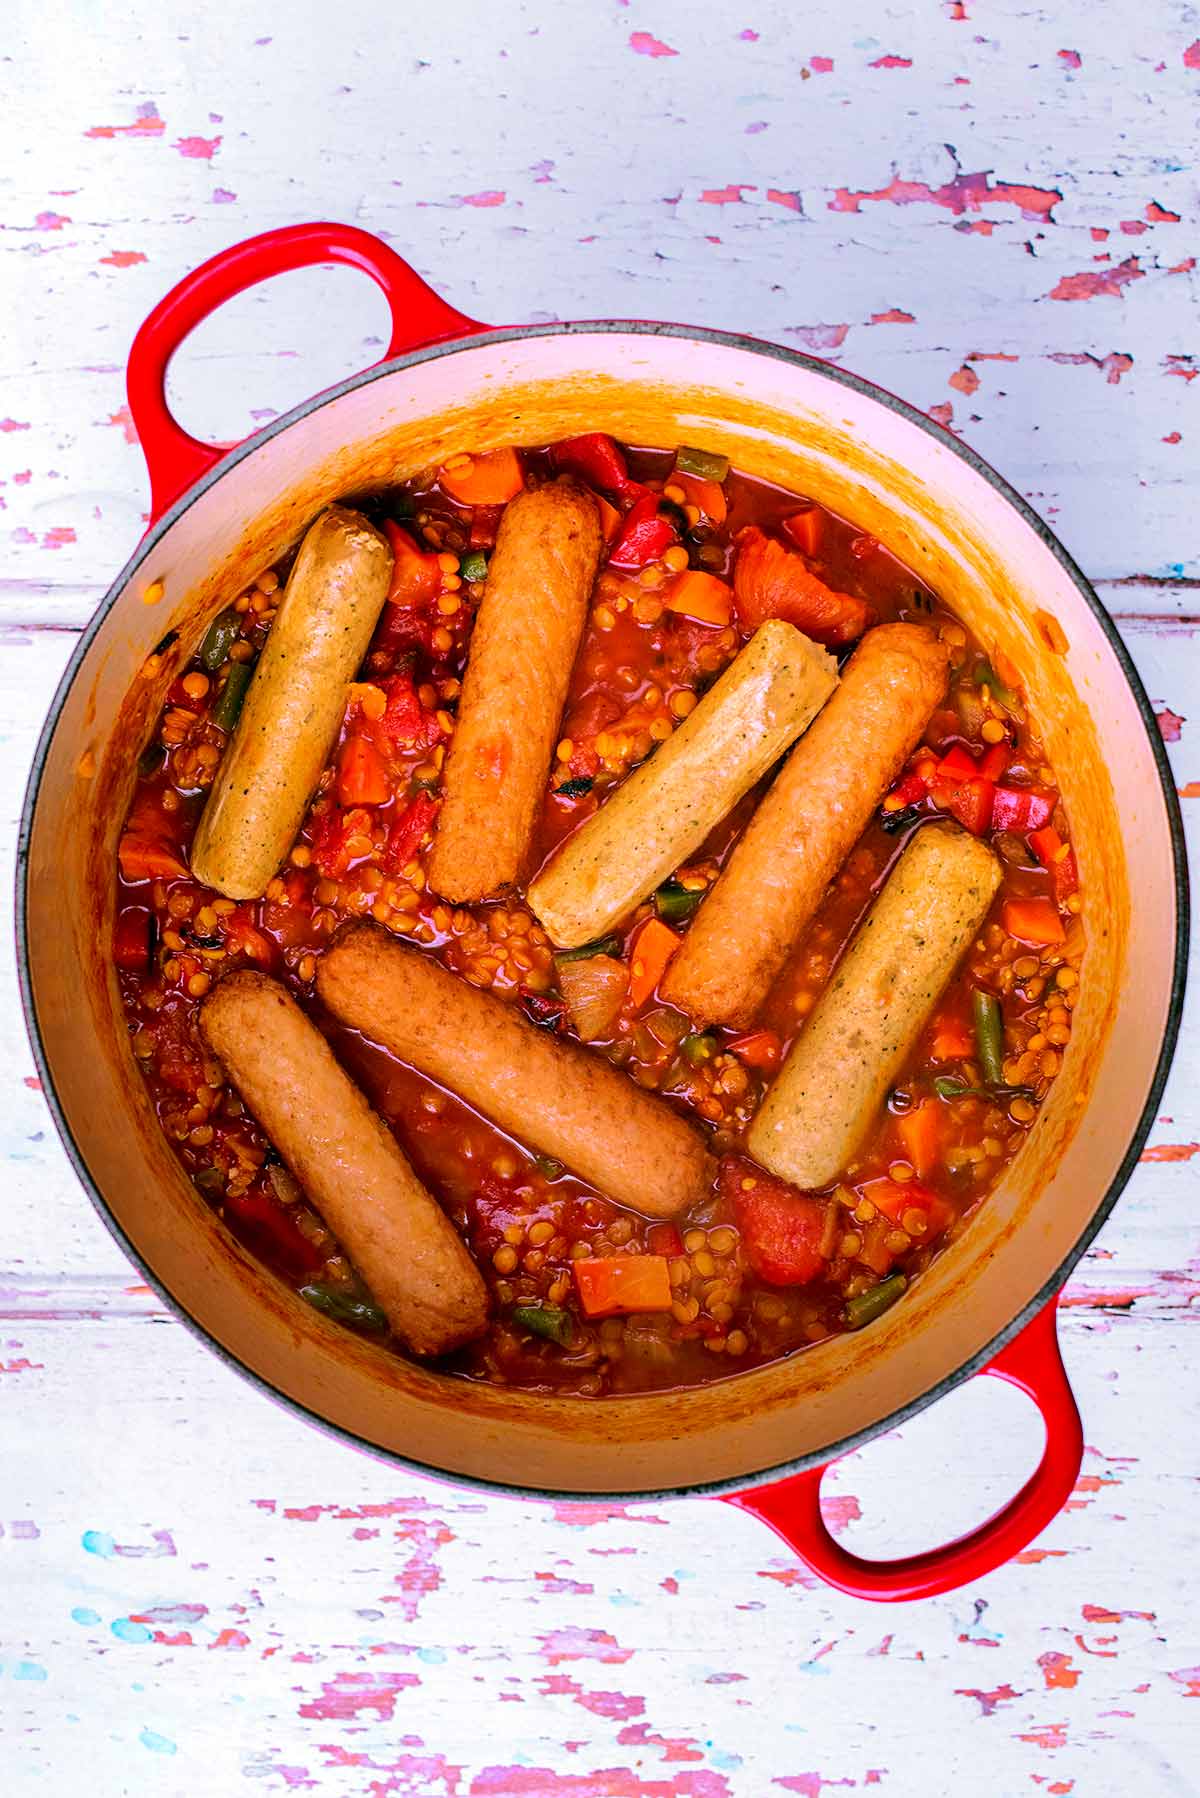 Sausages, lentils and vegetables cooking in a large red pot.